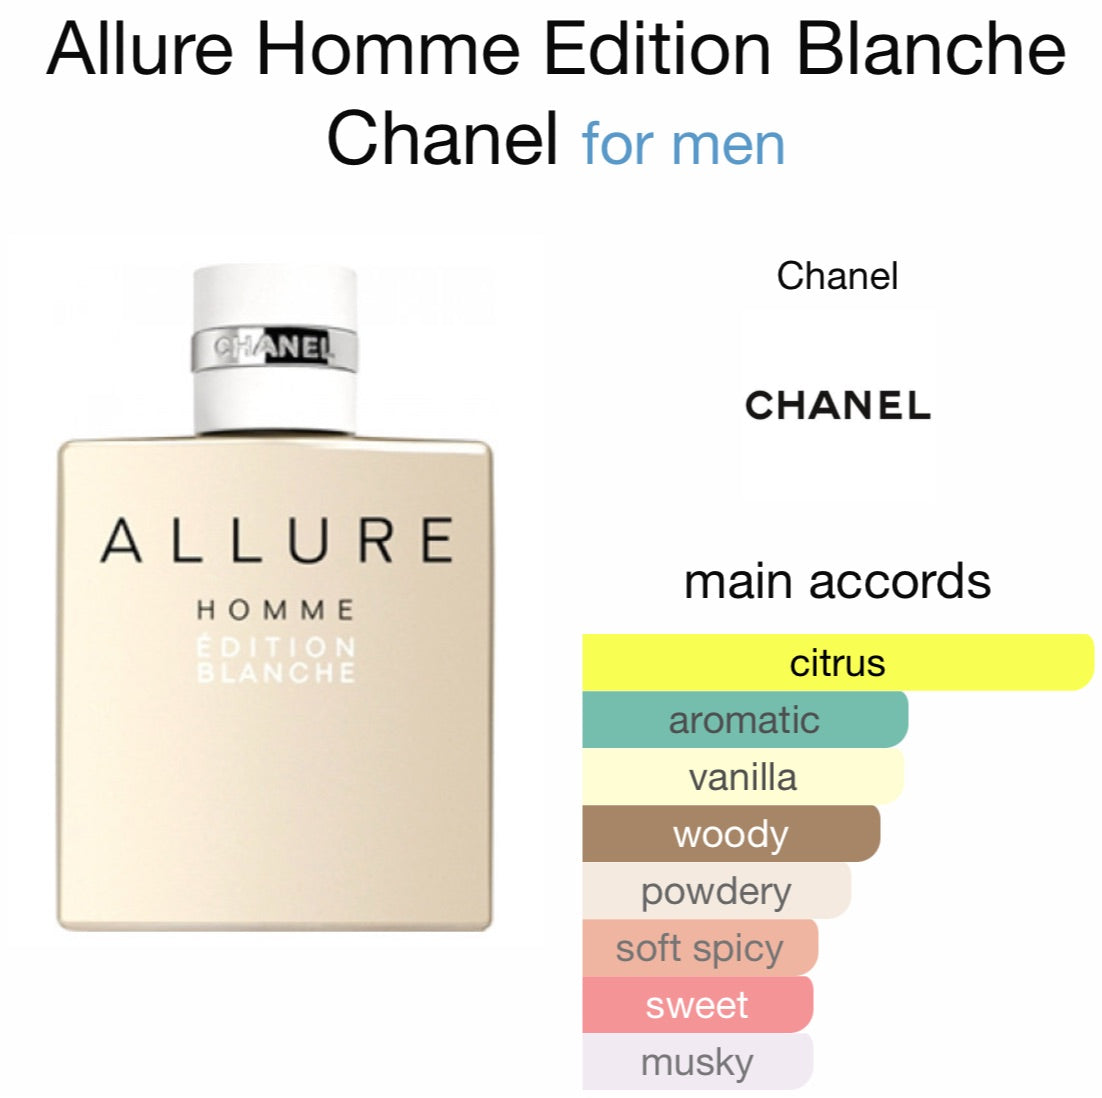 Chanel - Allure Homme Blanche Edition